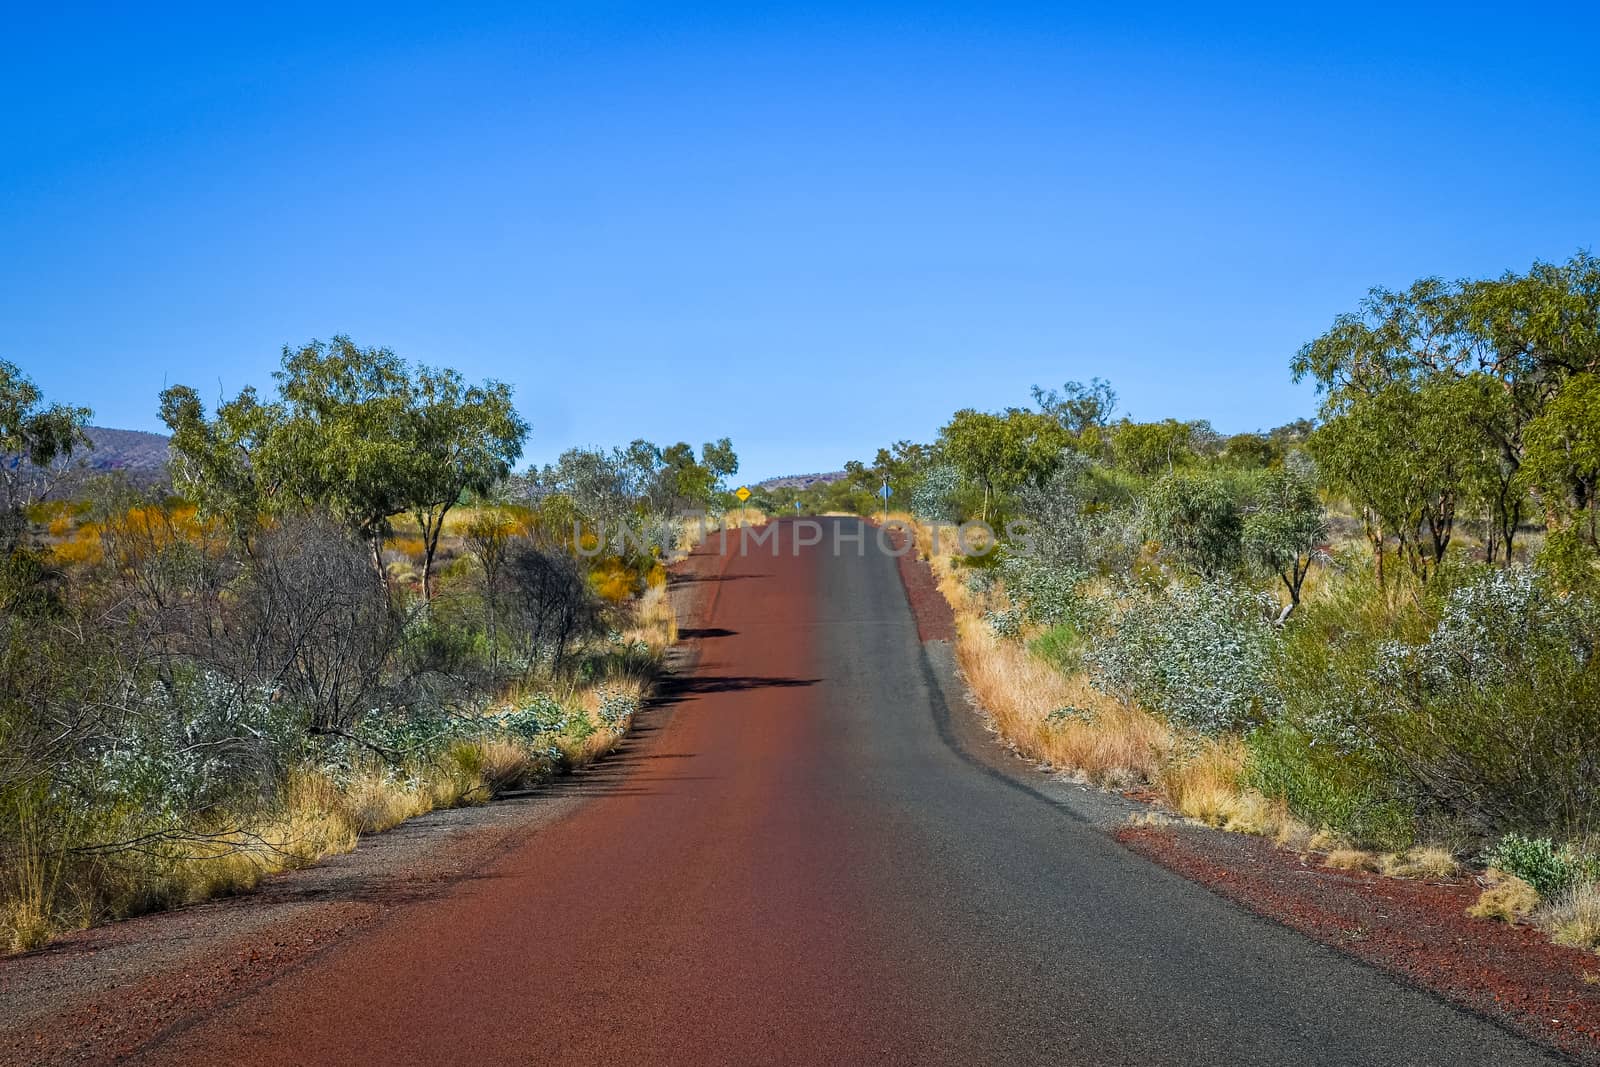 Road at Karijni National Park colored half red by desert dust and sand